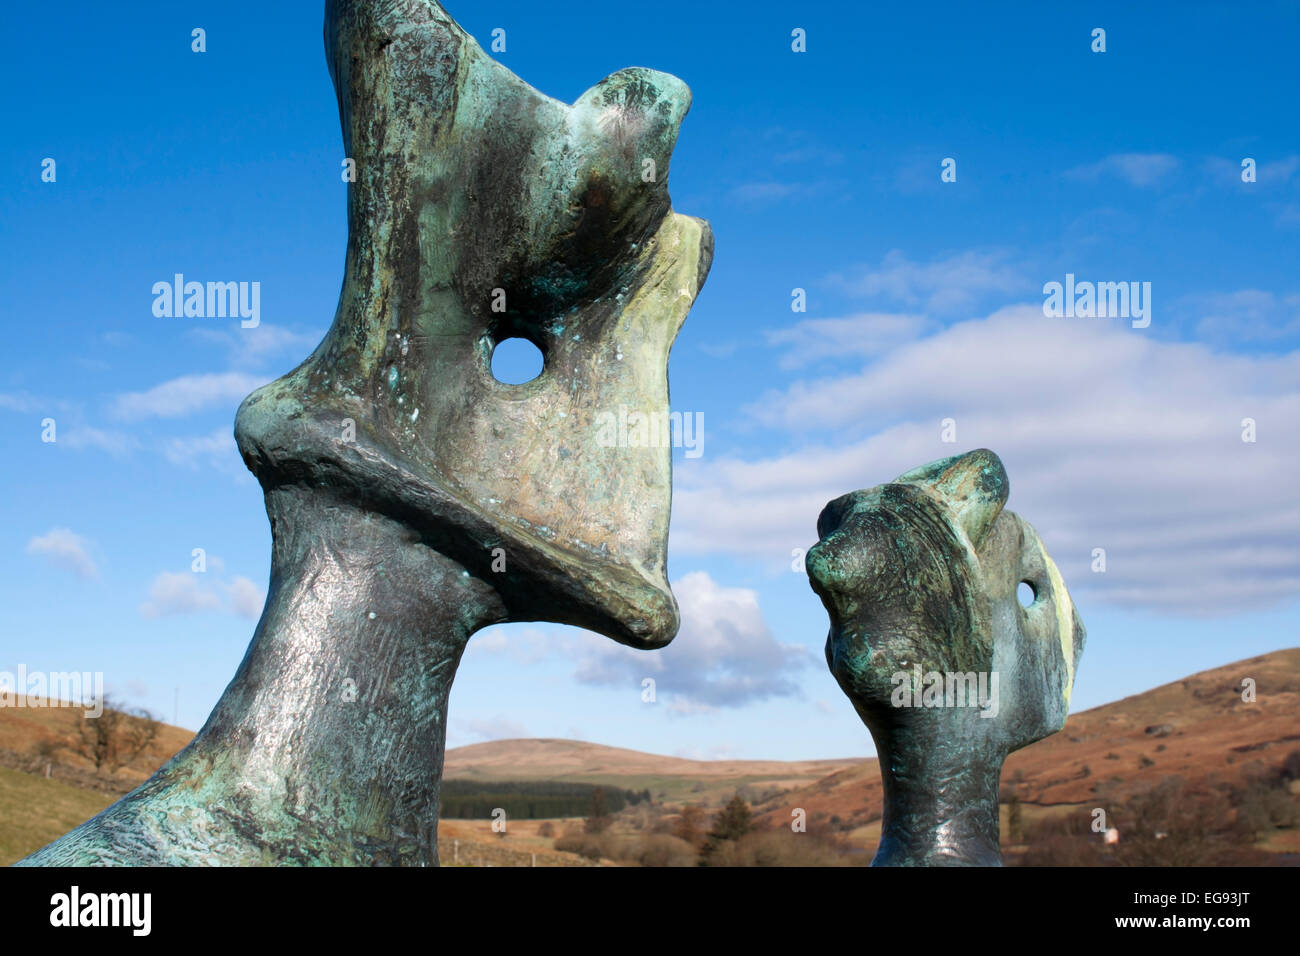 King and Queen', Henry Moore OM, CH, 1952–3, cast 1957